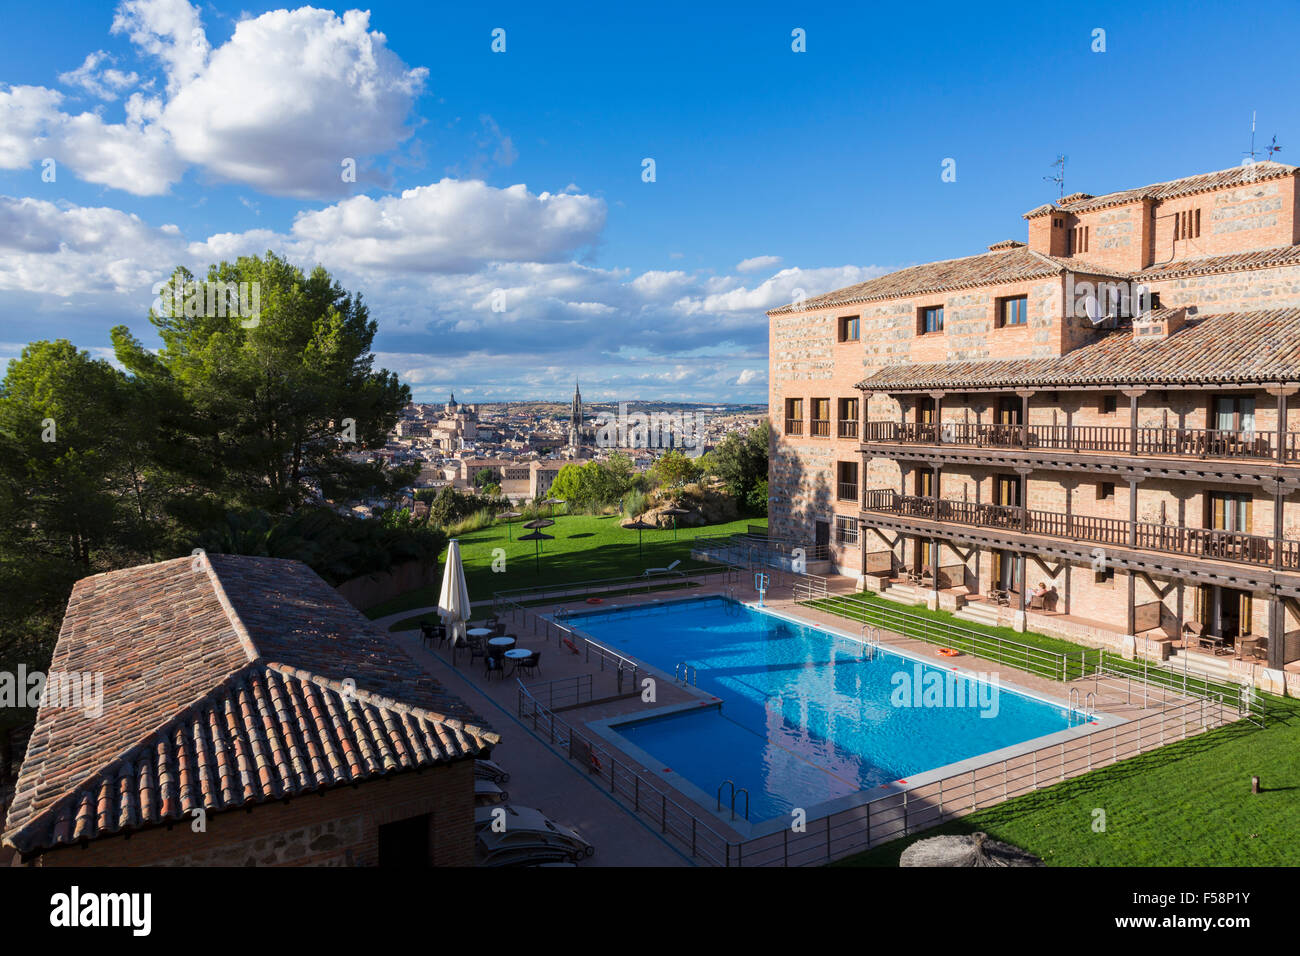 Parador de Toledo hotel with pool and dramatic overview of the city of Toledo, Spain, Europe Stock Photo